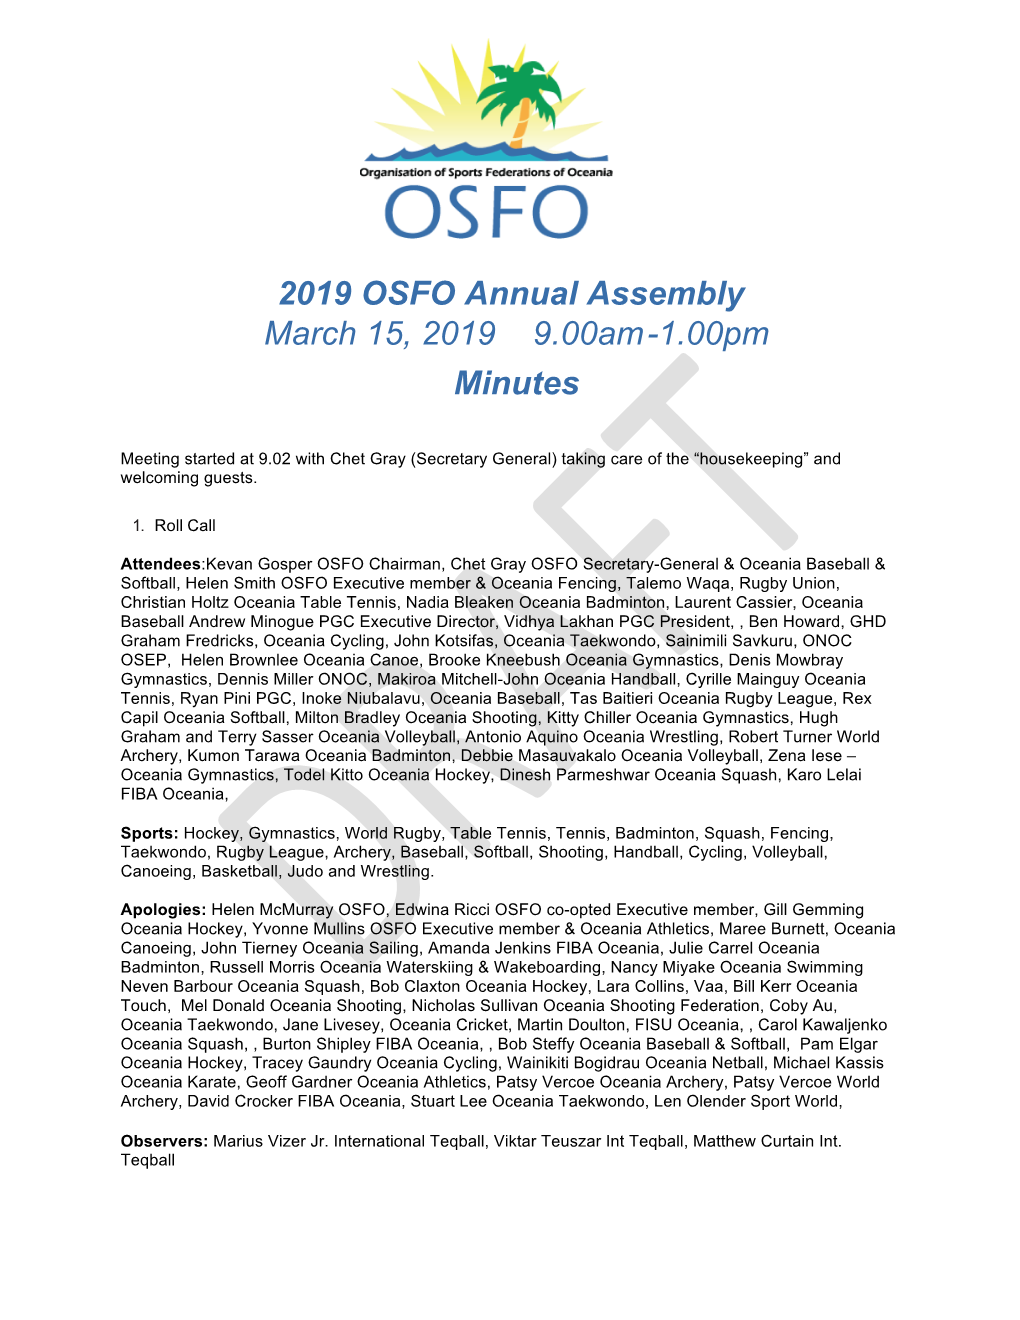 2019 OSFO Annual Assembly March 15, 2019 9.00Am -1.00Pm Minutes